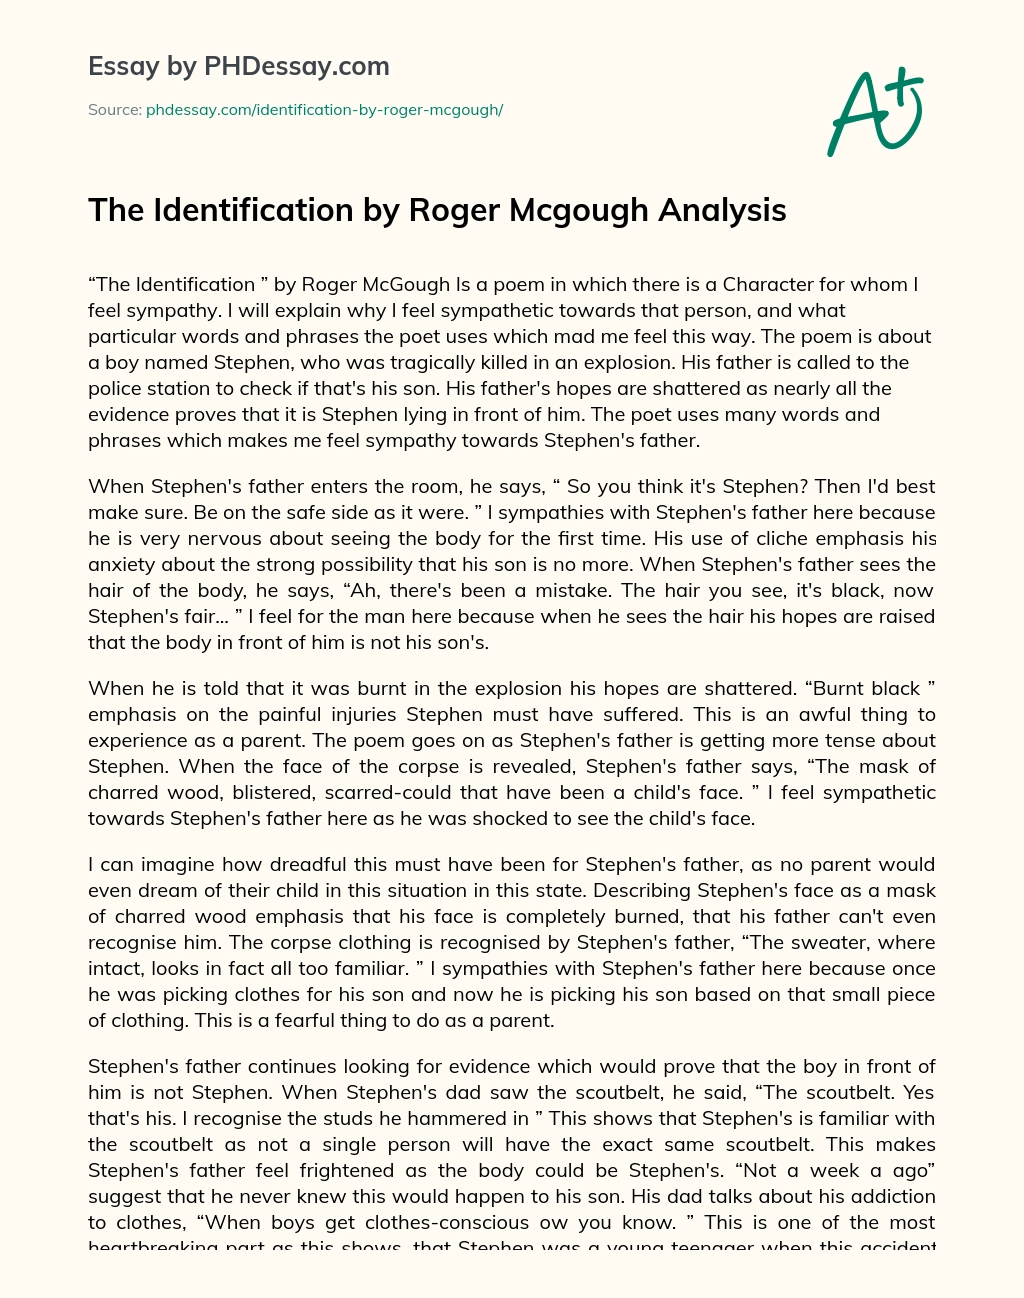 The Identification by Roger Mcgough Analysis essay